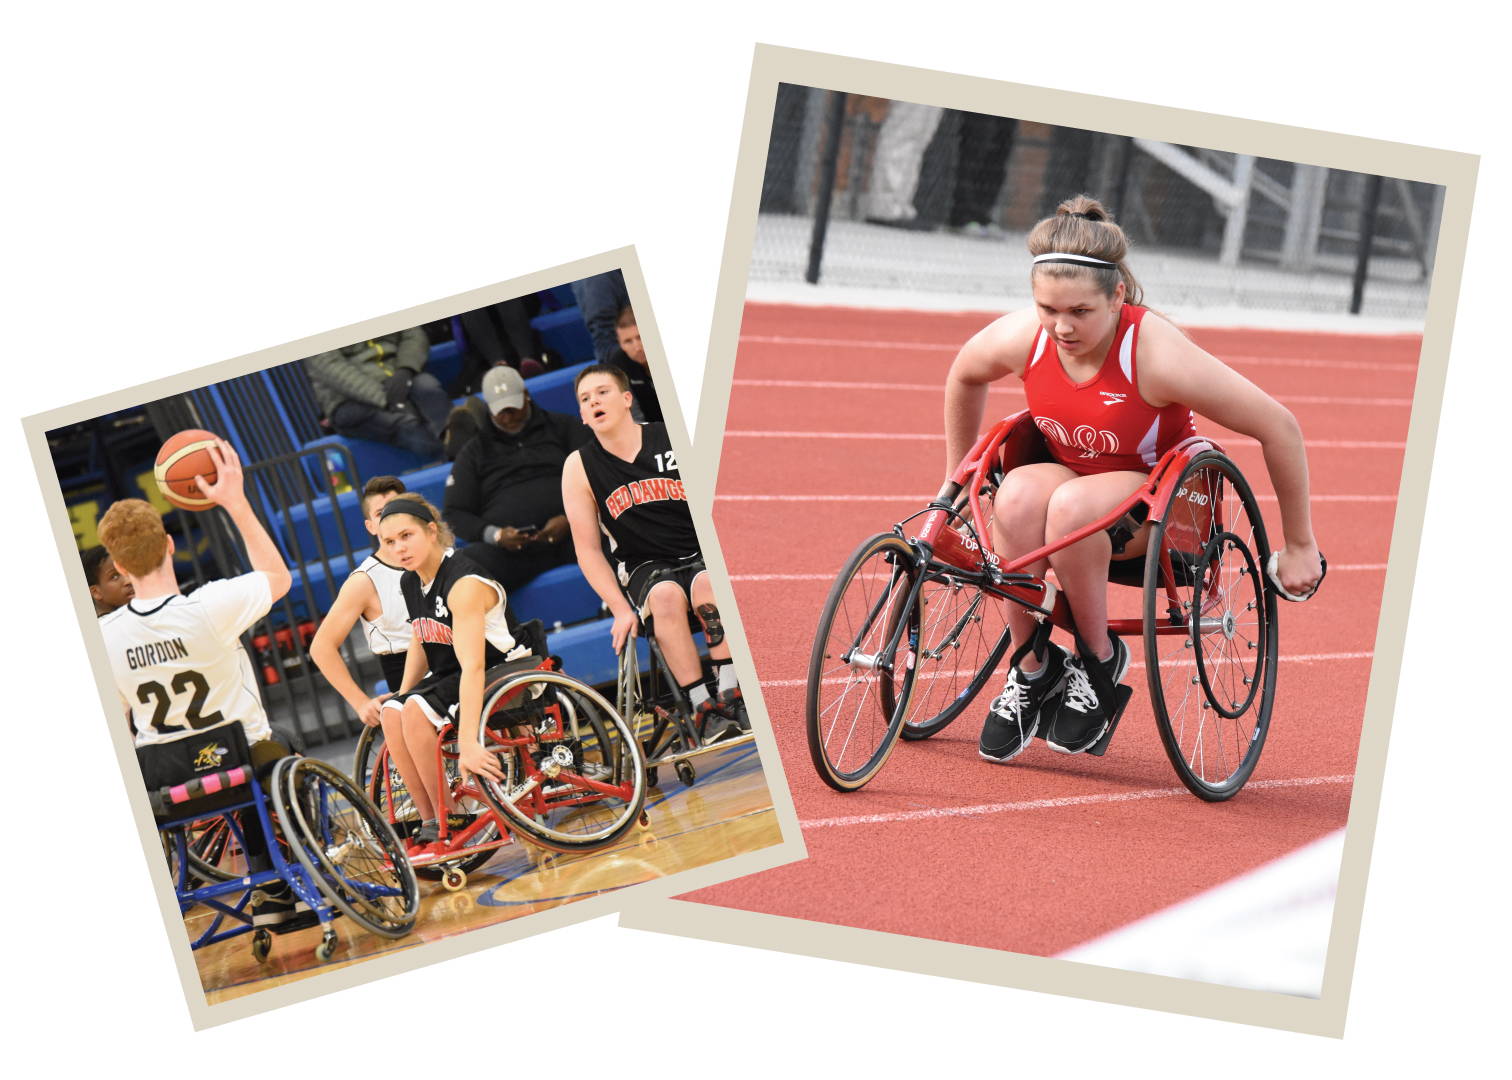 Eva Houston as a young athlete, competing in wheelchair basketball and wheelchair racing on a track